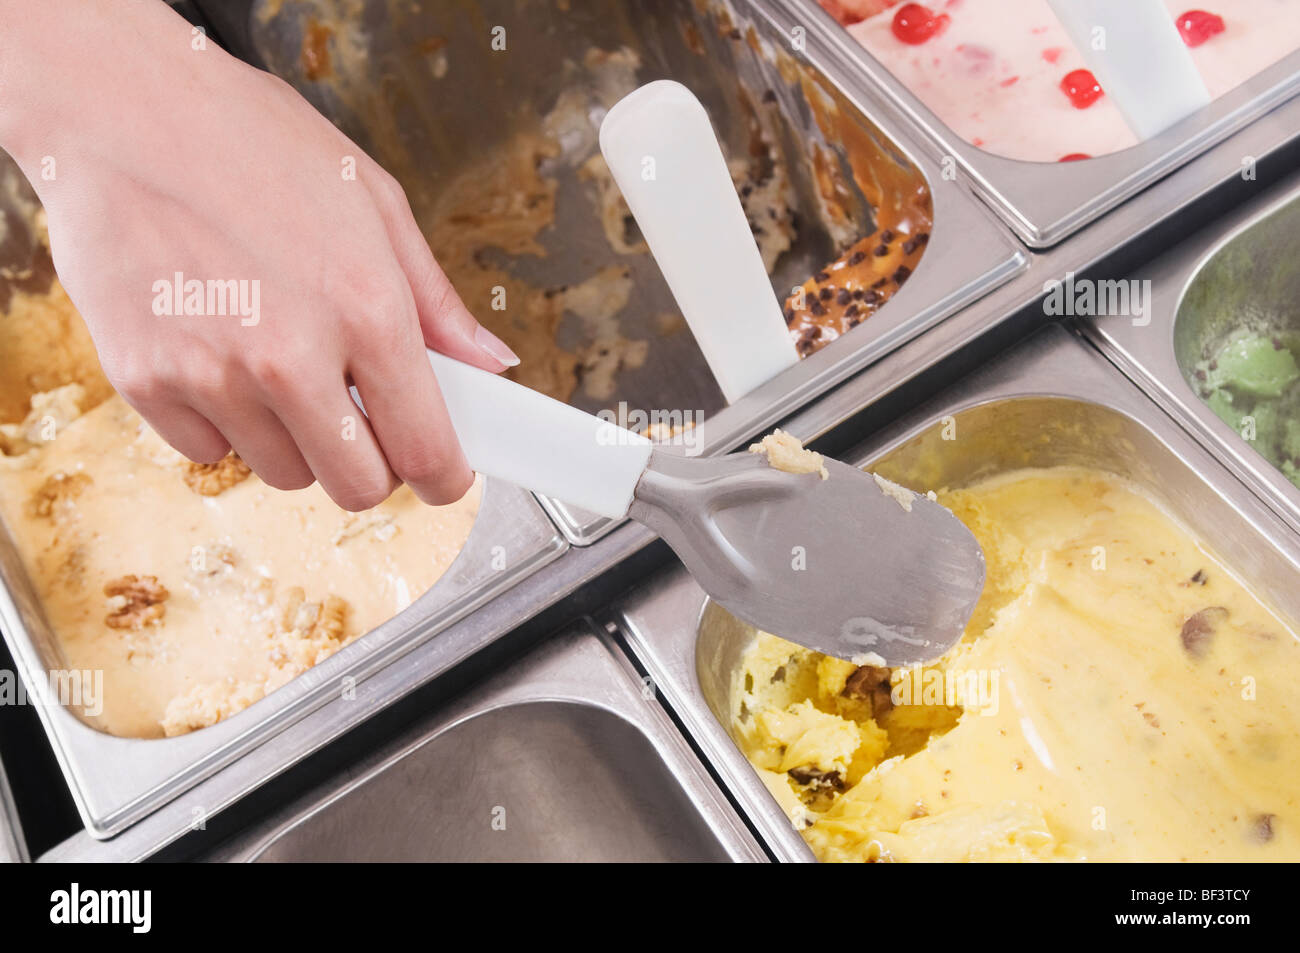 Man's hand taking scoop of ice cream out of container Stock Photo